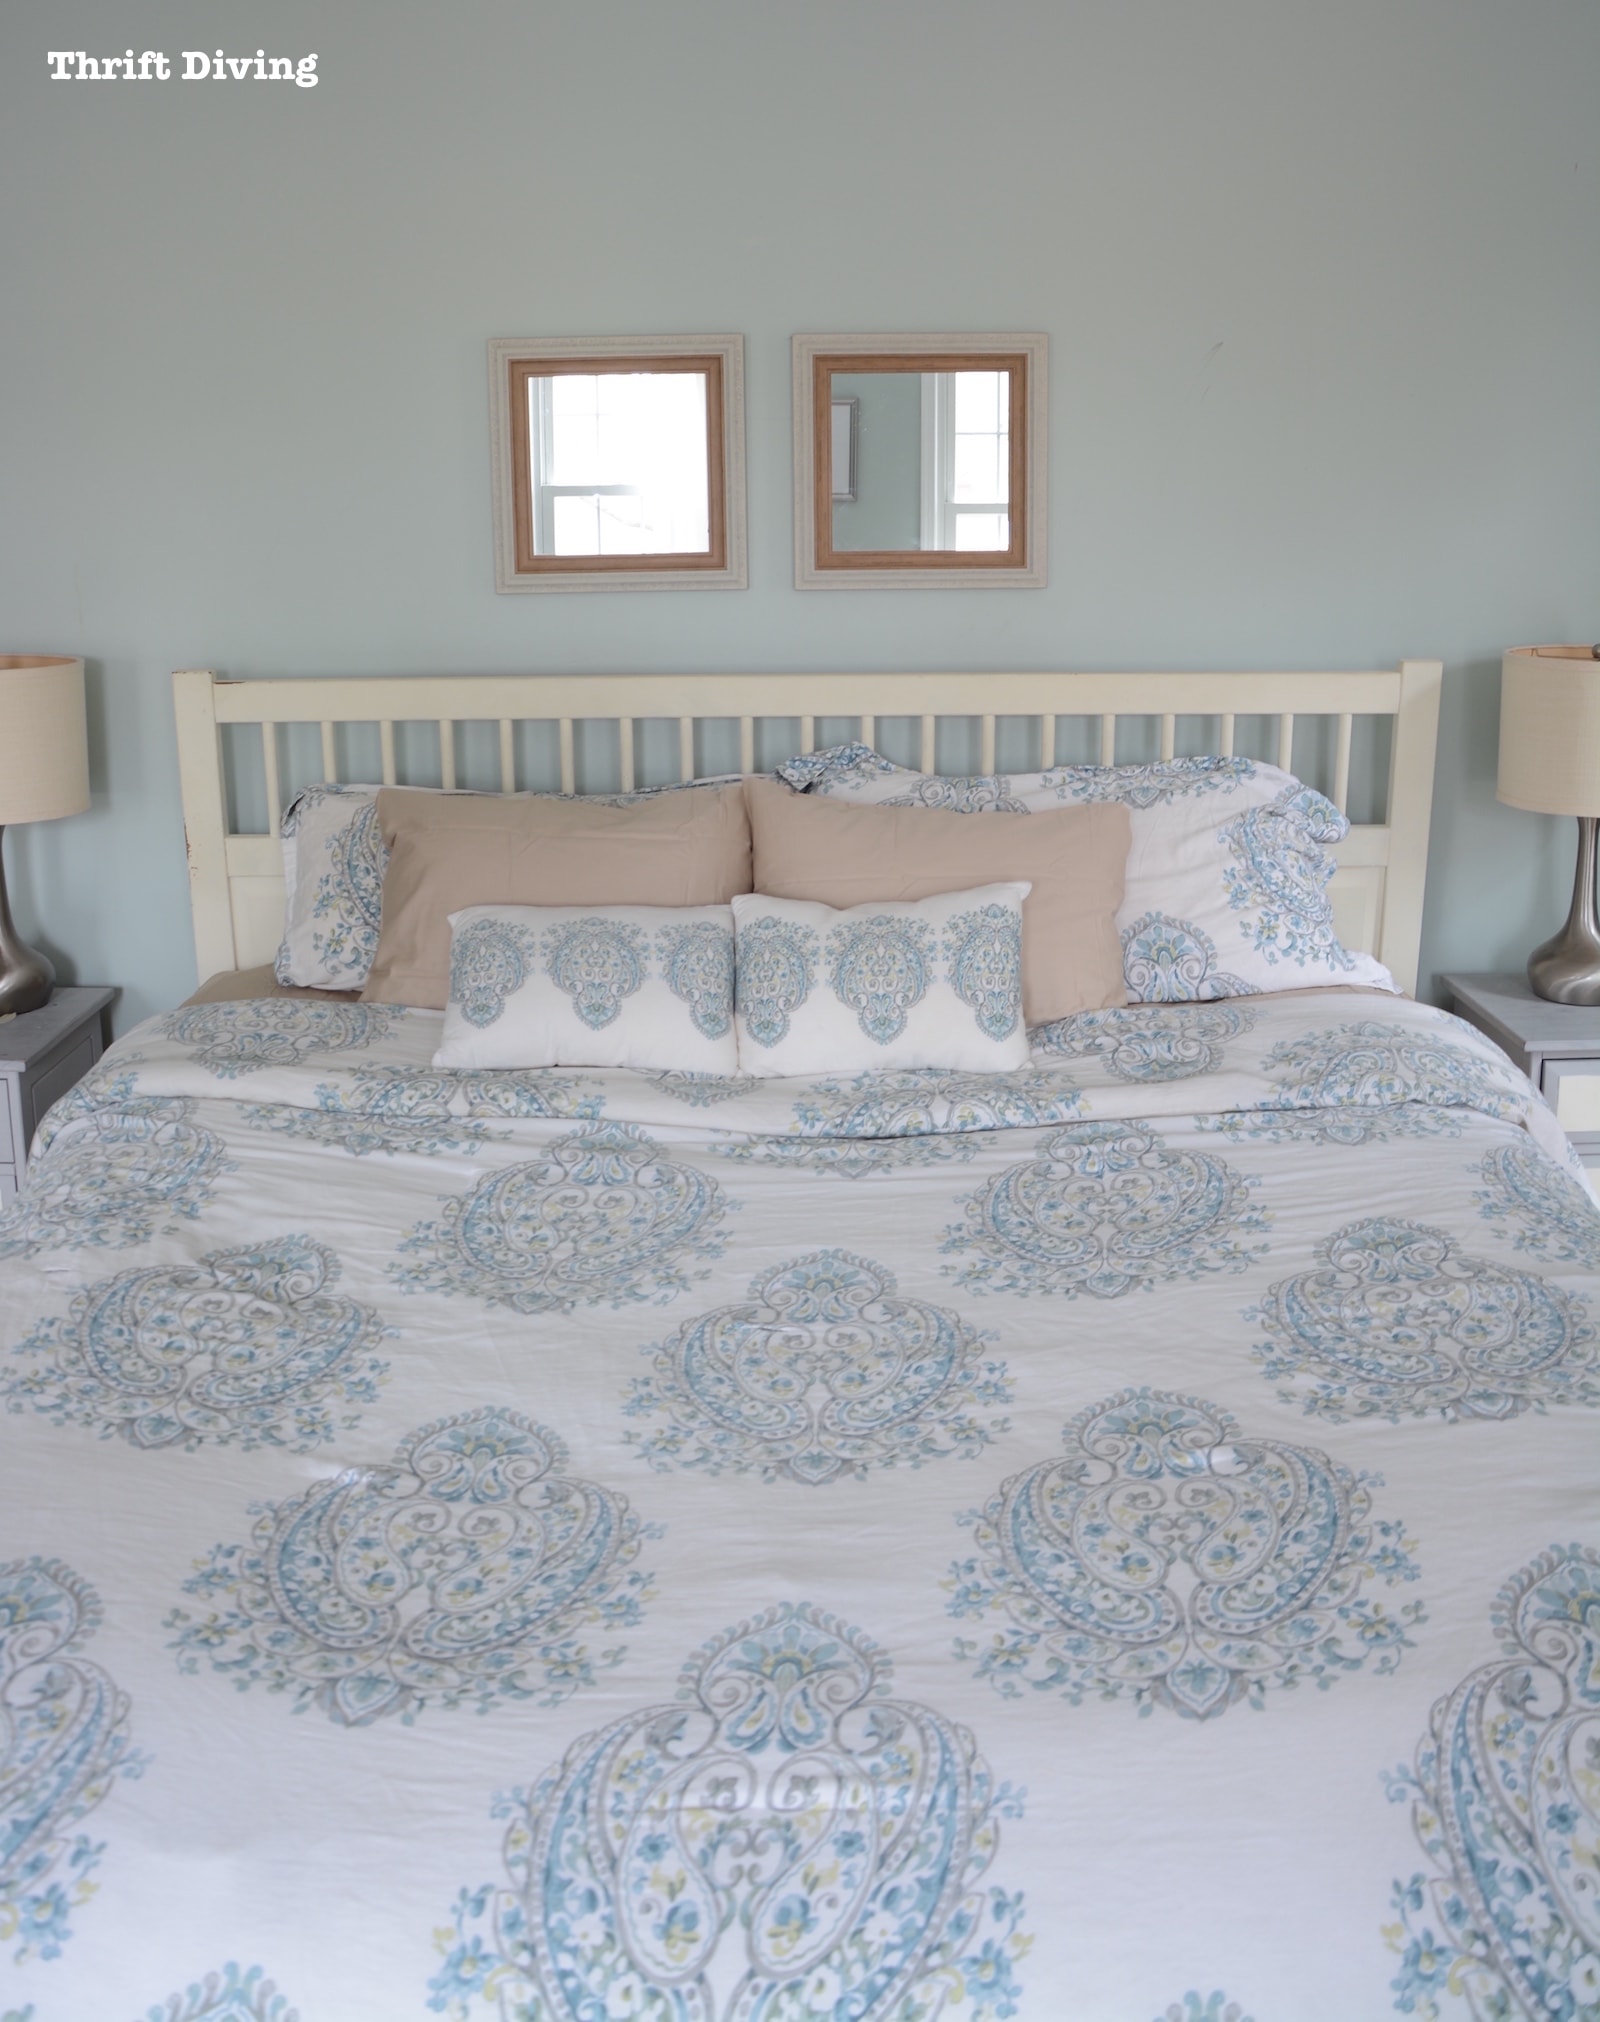 Are Brentwood pillows worth it? A Brentwood Home pillows review - New pillows on an old bed. - Thrift Diving